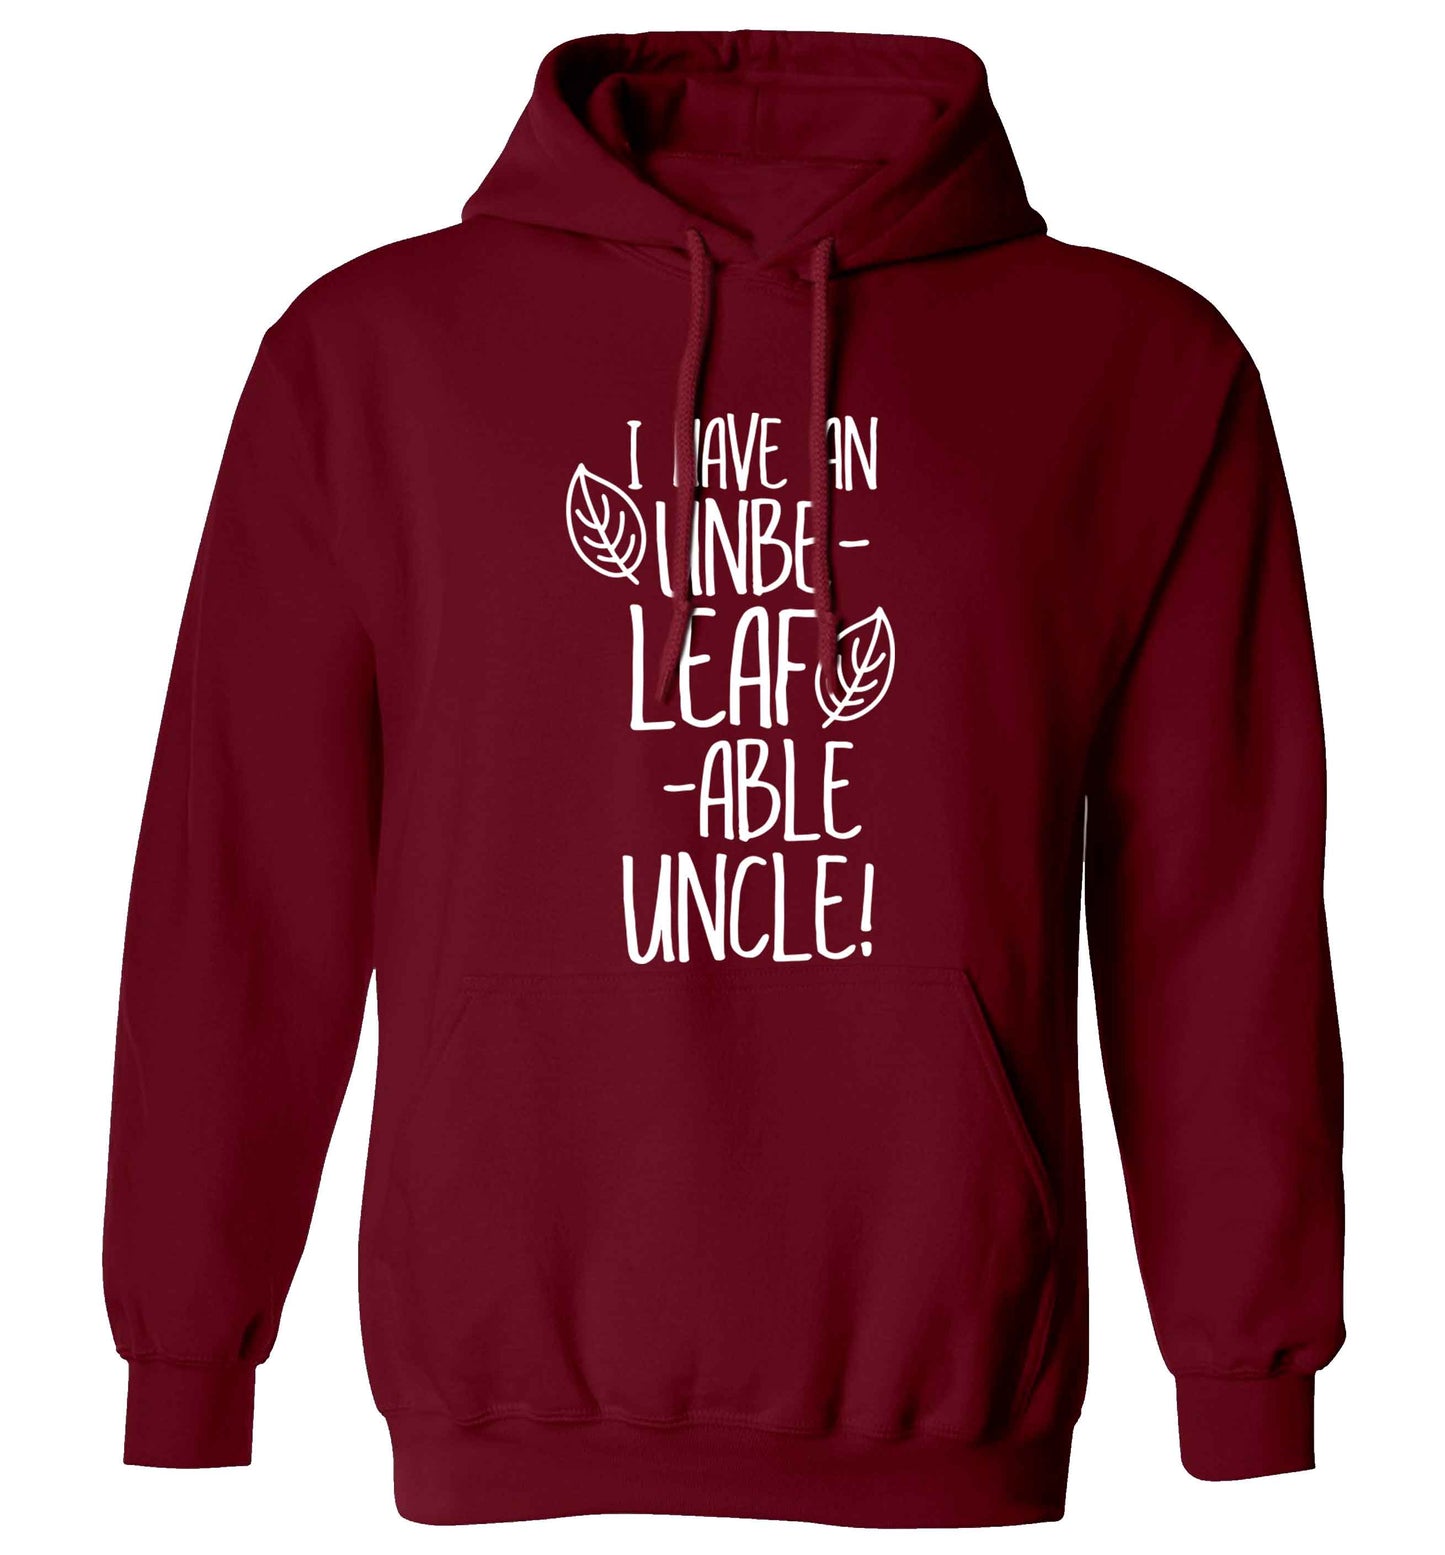 I have an unbe-leaf-able uncle adults unisex maroon hoodie 2XL